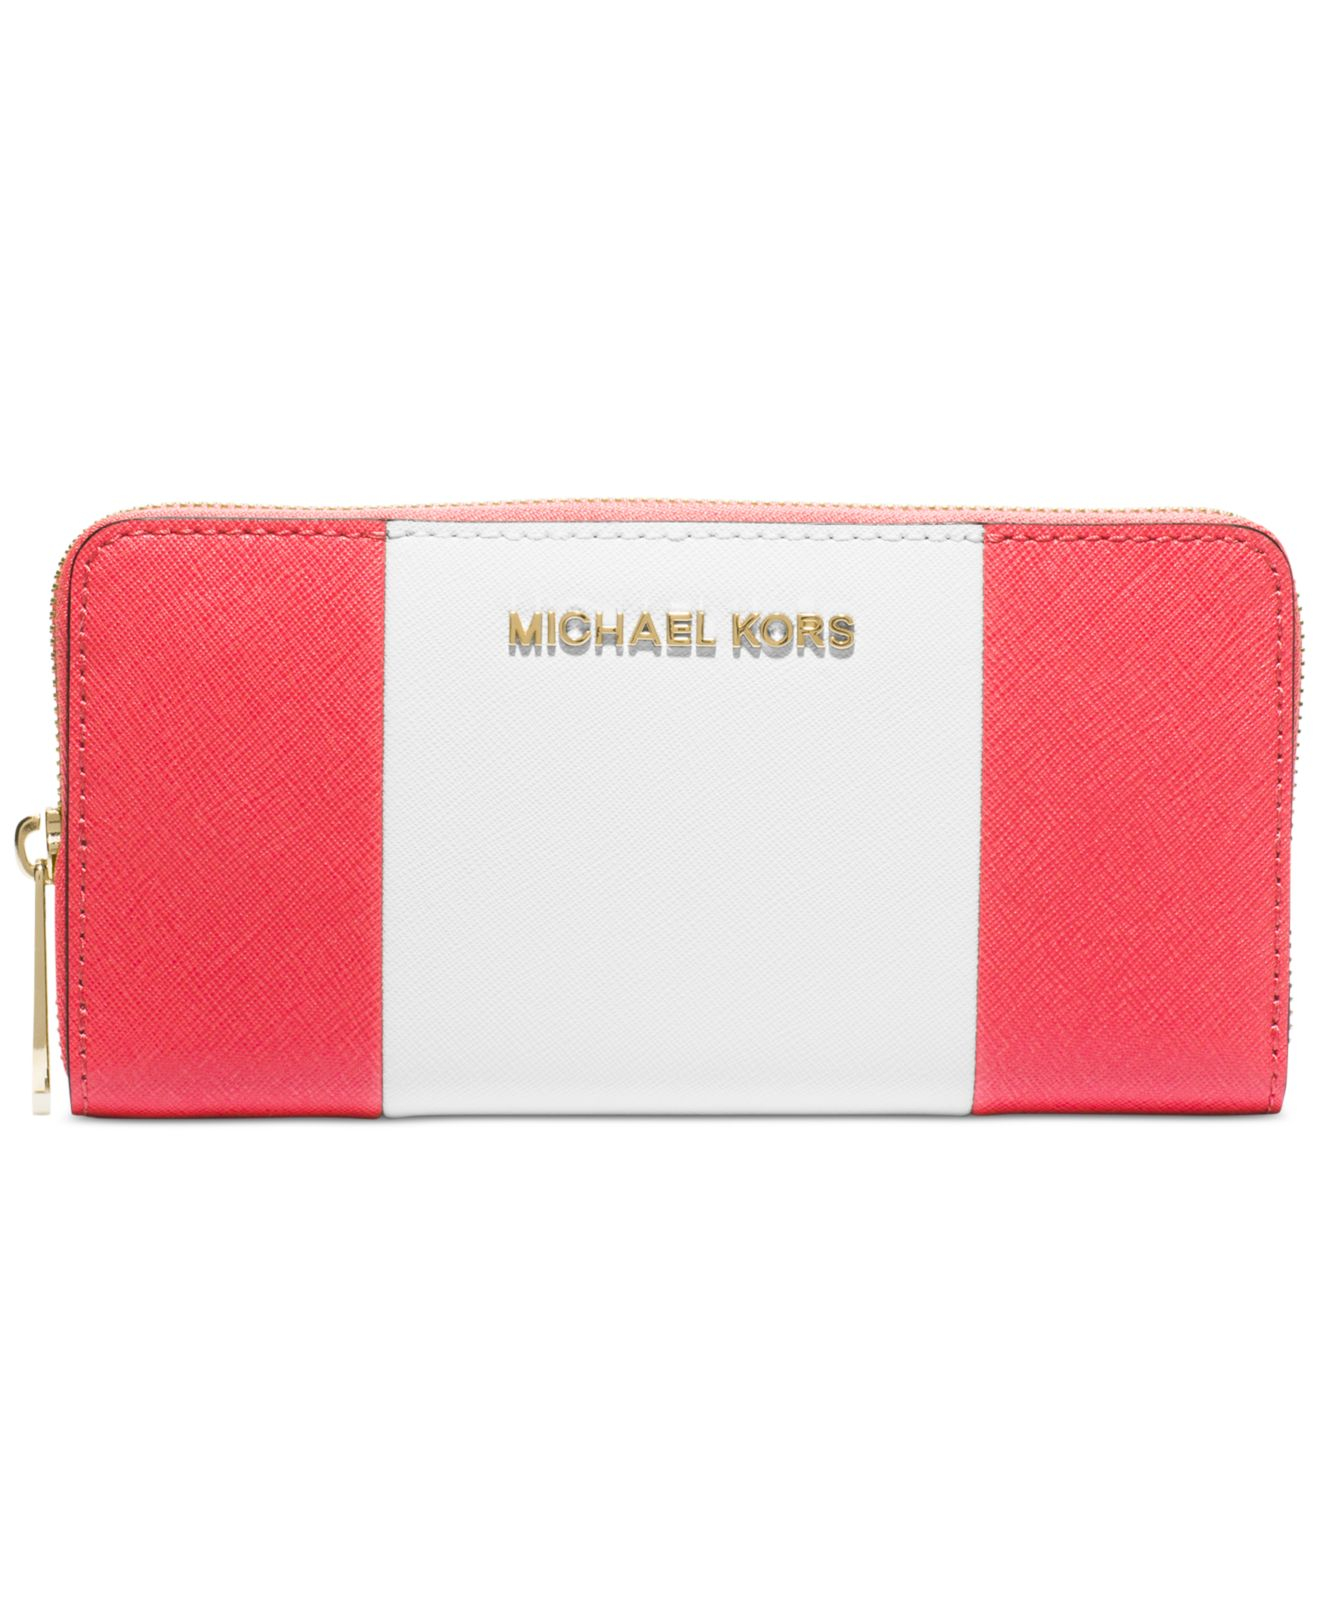 red and white striped michael kors purse